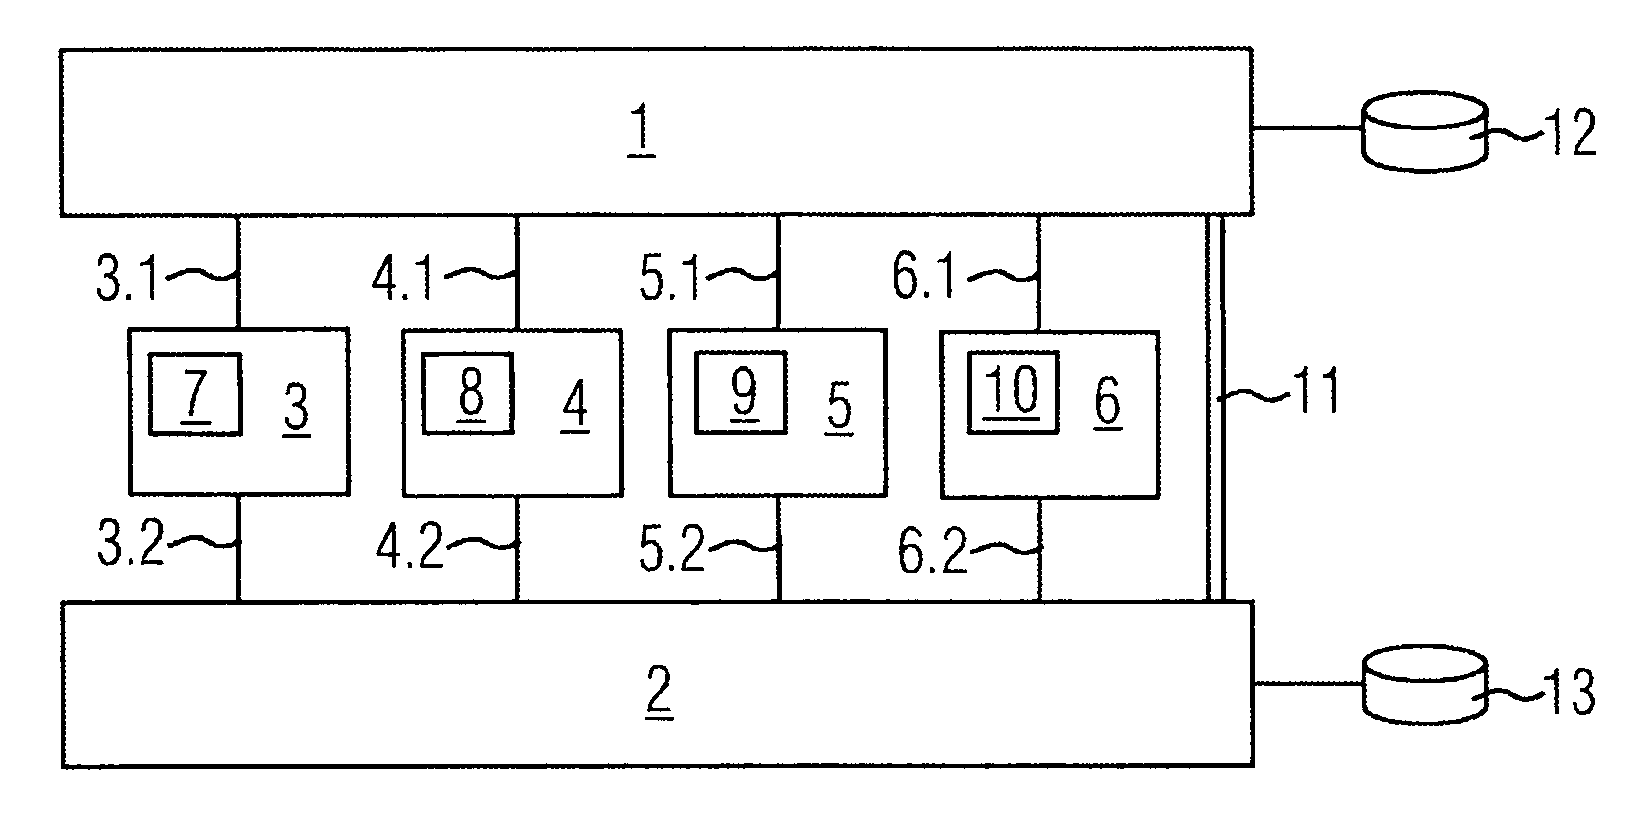 Method for error detection in a packet-based message distribution system